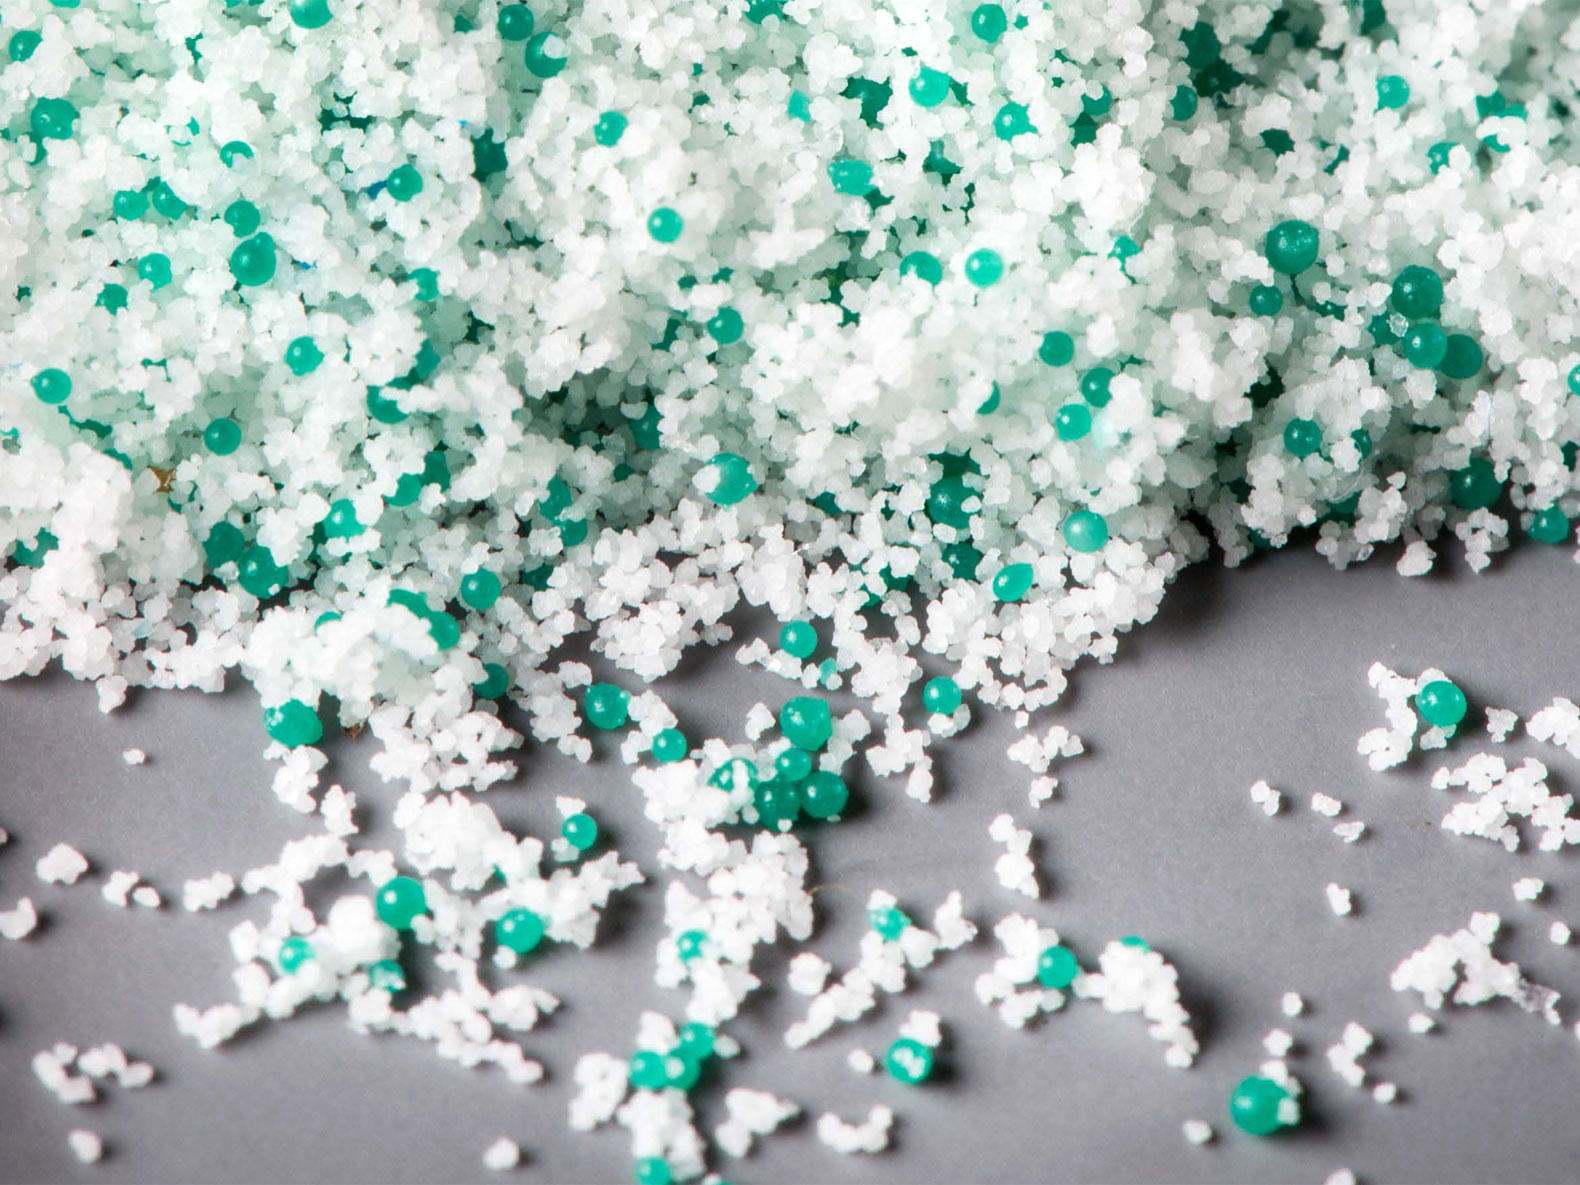 Want Some Salt With Your Plastic? — Study: 17 of 17 Sea Salt Brands Littered With Petrochemicals